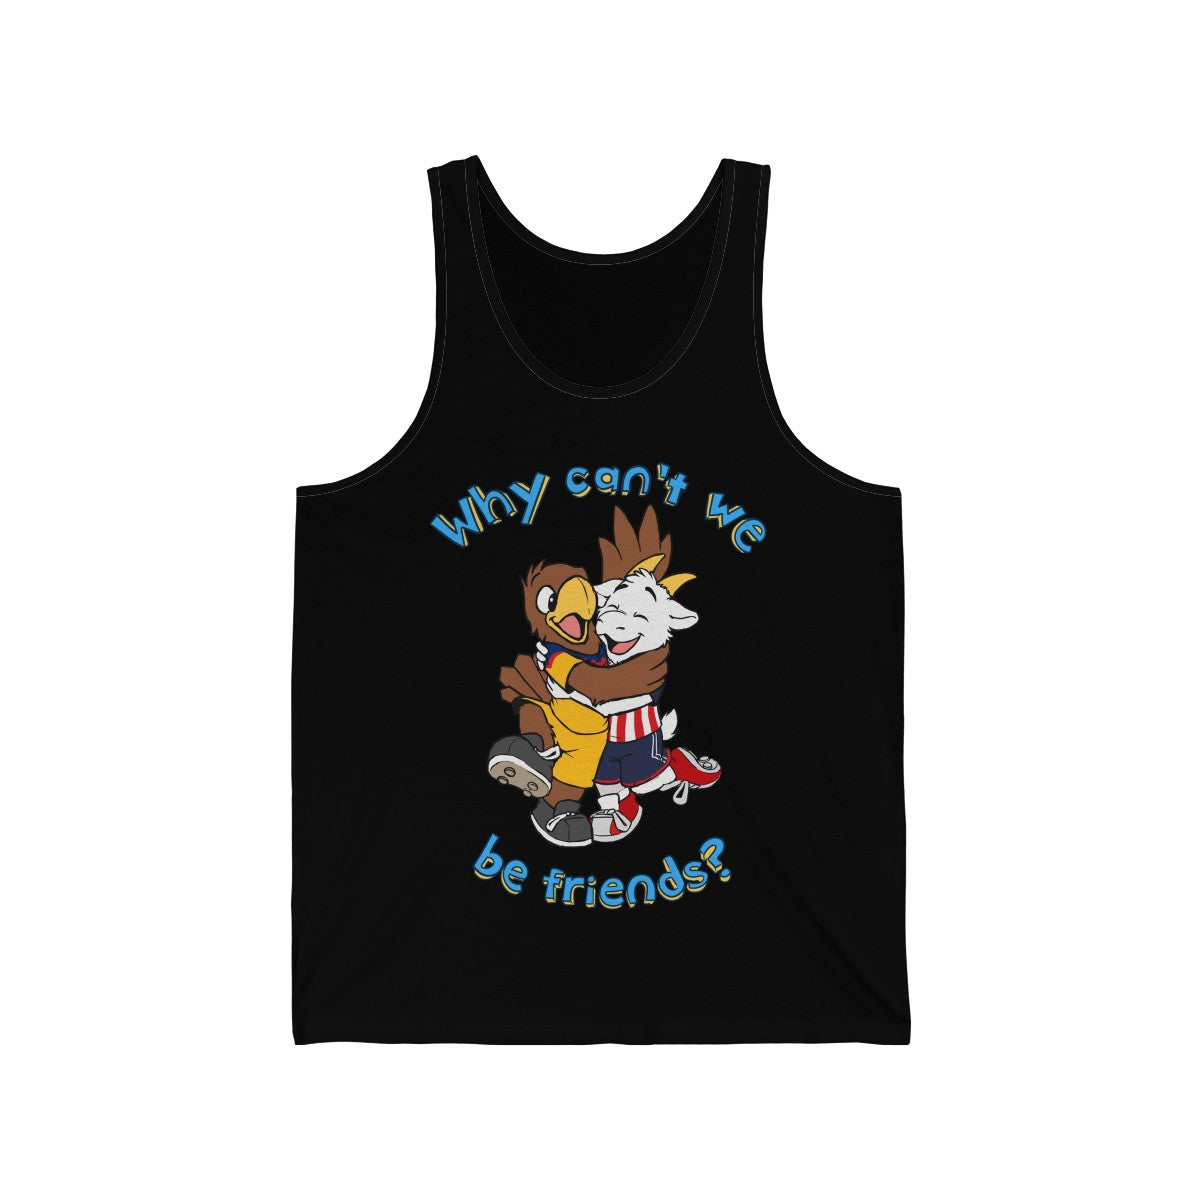 Why Can't we be Friends? - Tank Top Tank Top Paco Panda Black XS 